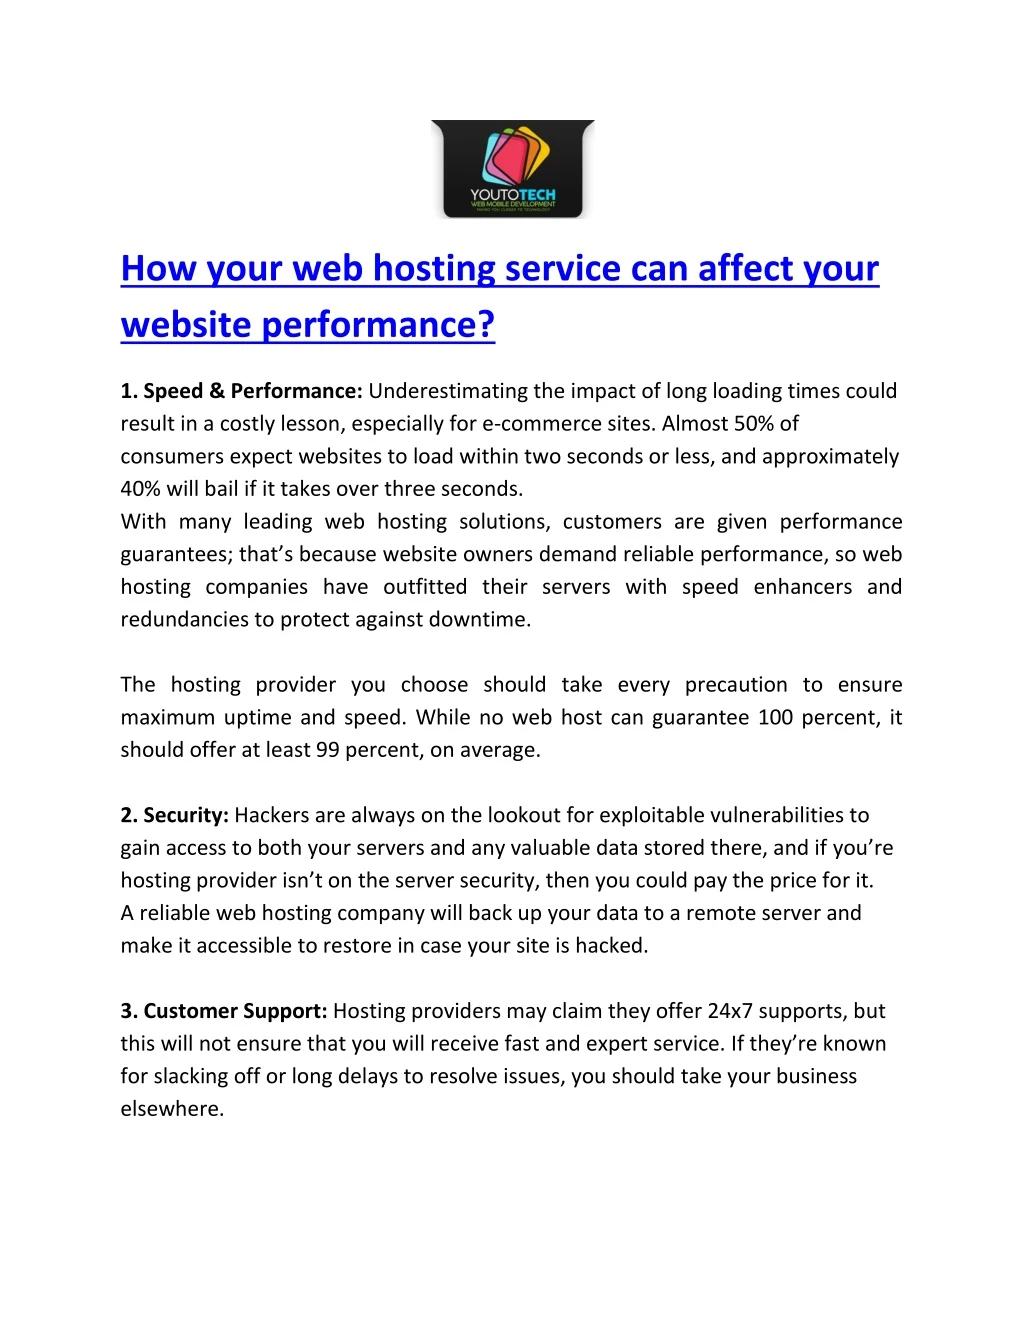 how your web hosting service can affect your